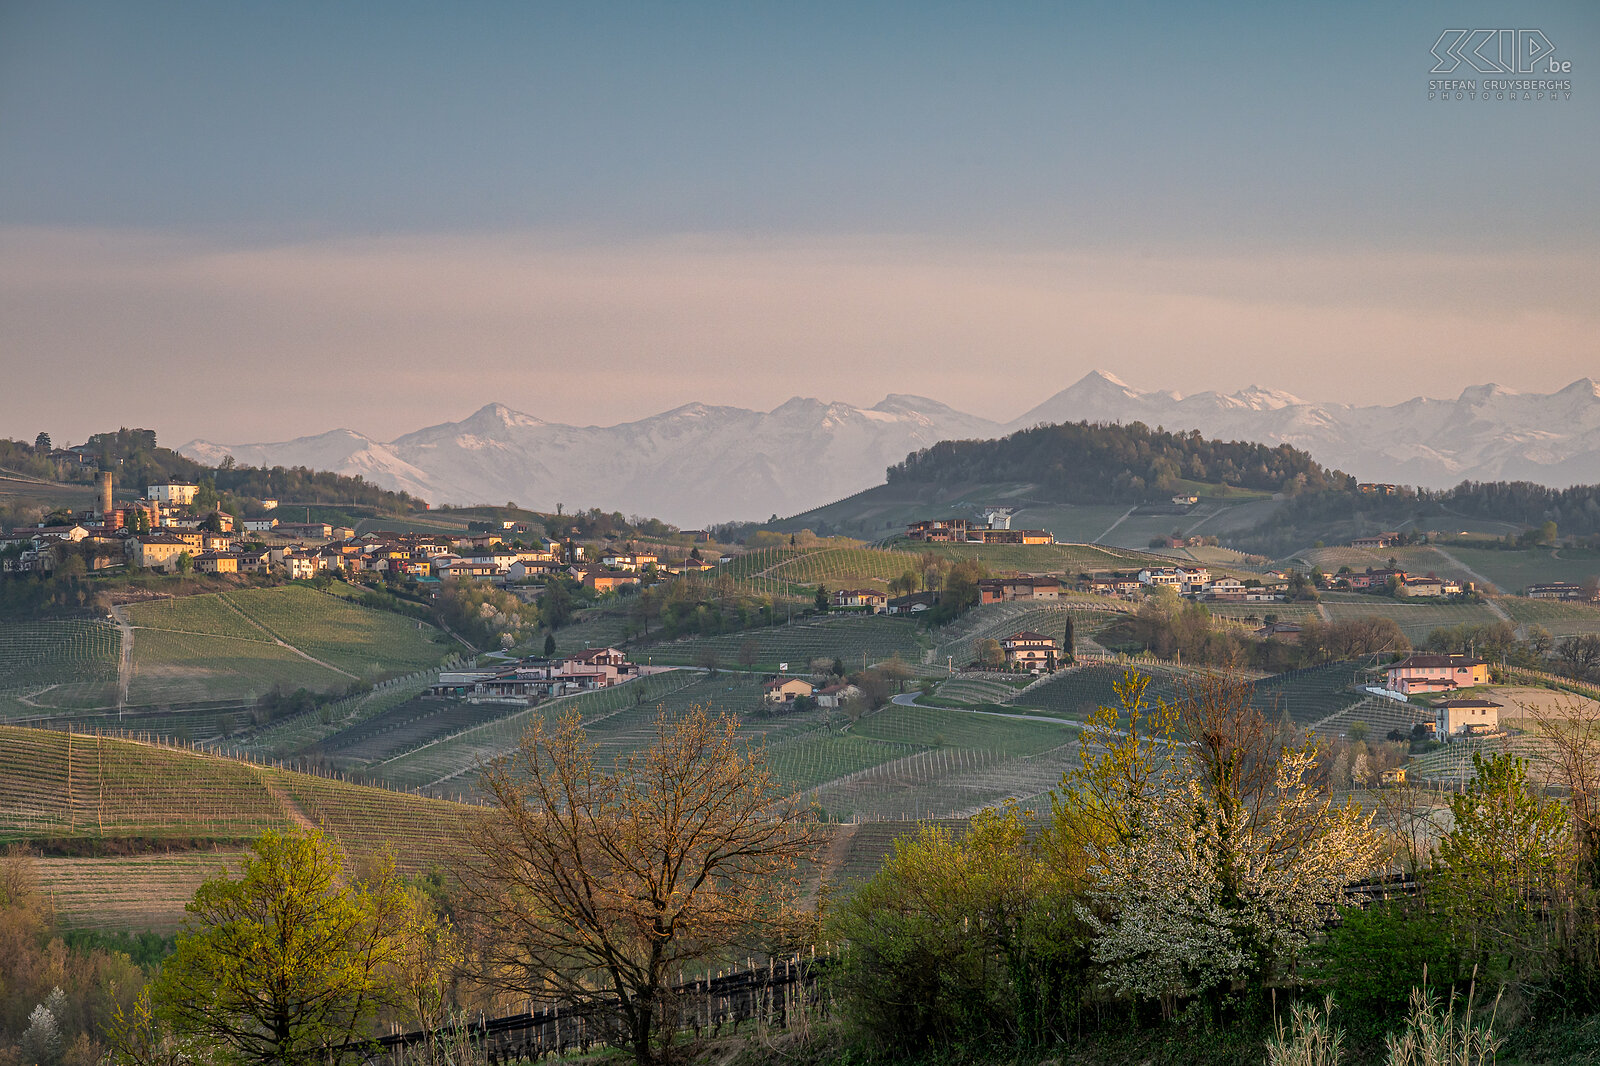 Langhe region - Sunset The beautiful Langhe Roero Monferrato region with the many famous vineyards and picturesque villages on the hills and in the distance some snowy Alpine peaks Stefan Cruysberghs